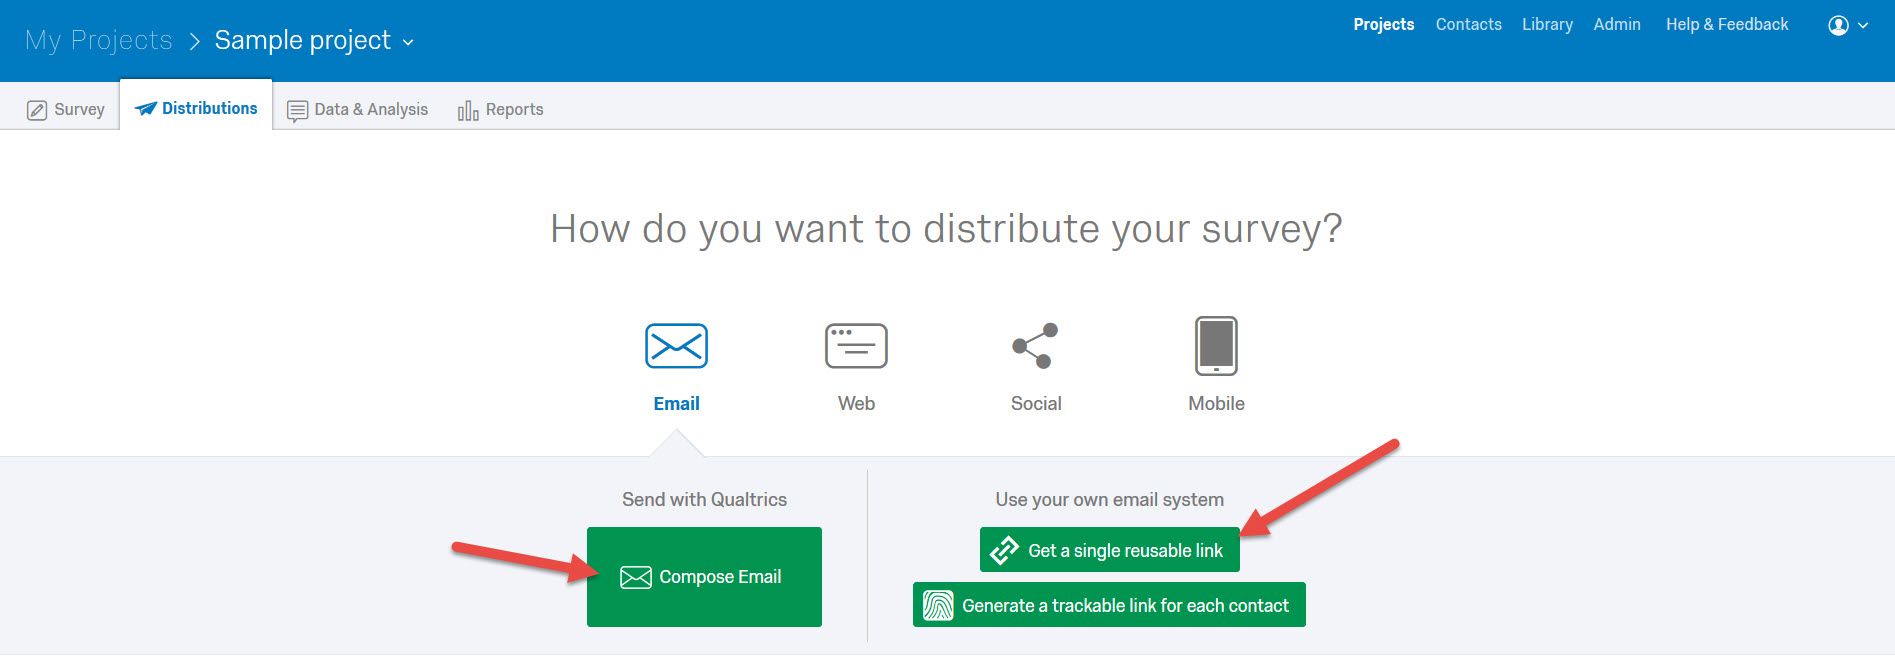 How to distribute the survey